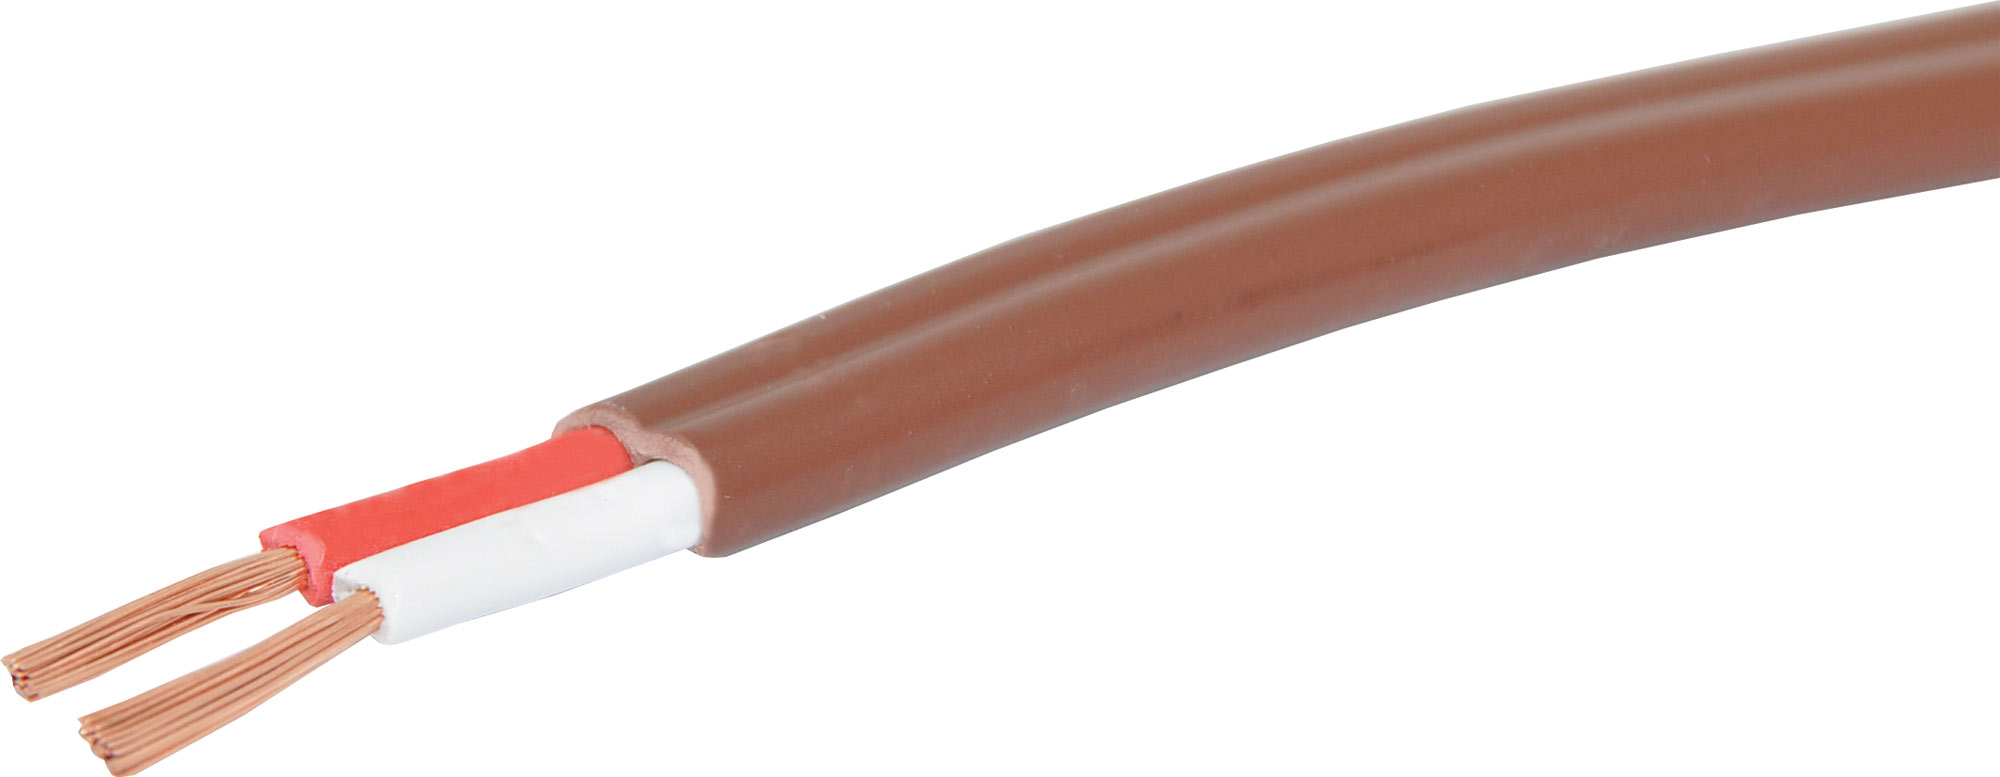 FIG8 CABLE 24/0.20 2 CORE UNSCREENED PVC SHEATH 200M BROWN